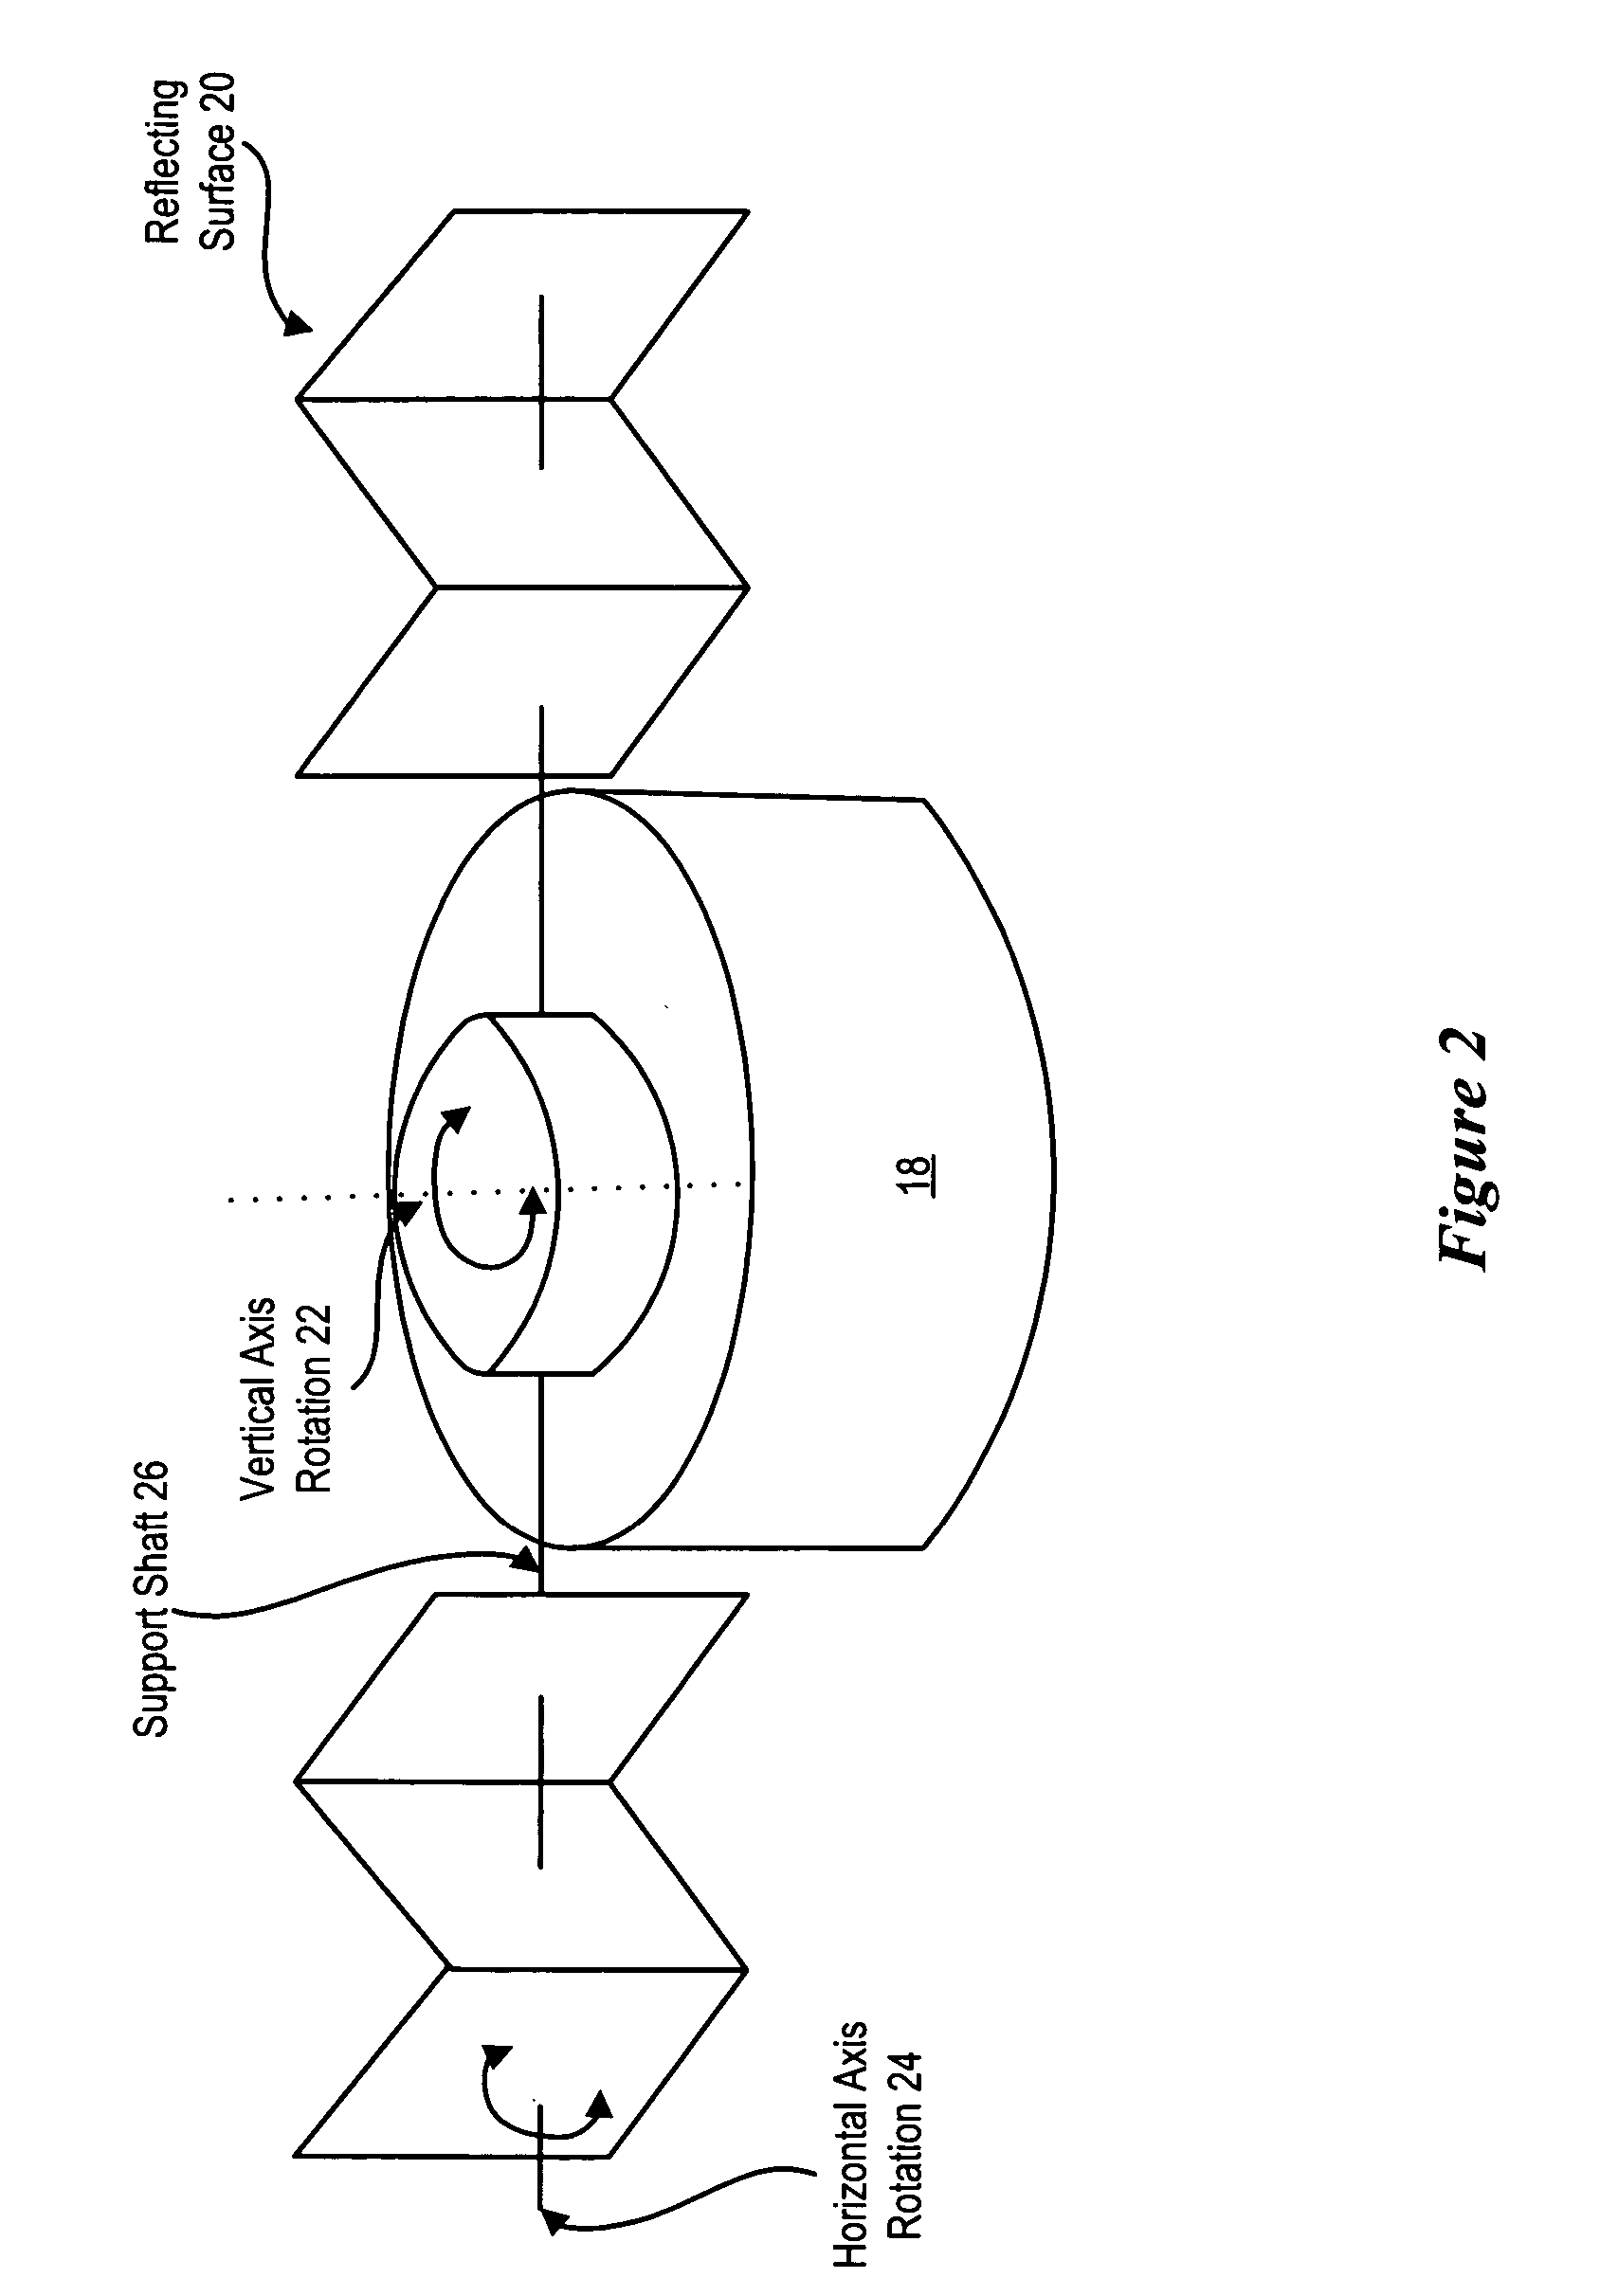 System and method for testing information handling system chassis shielding effectiveness